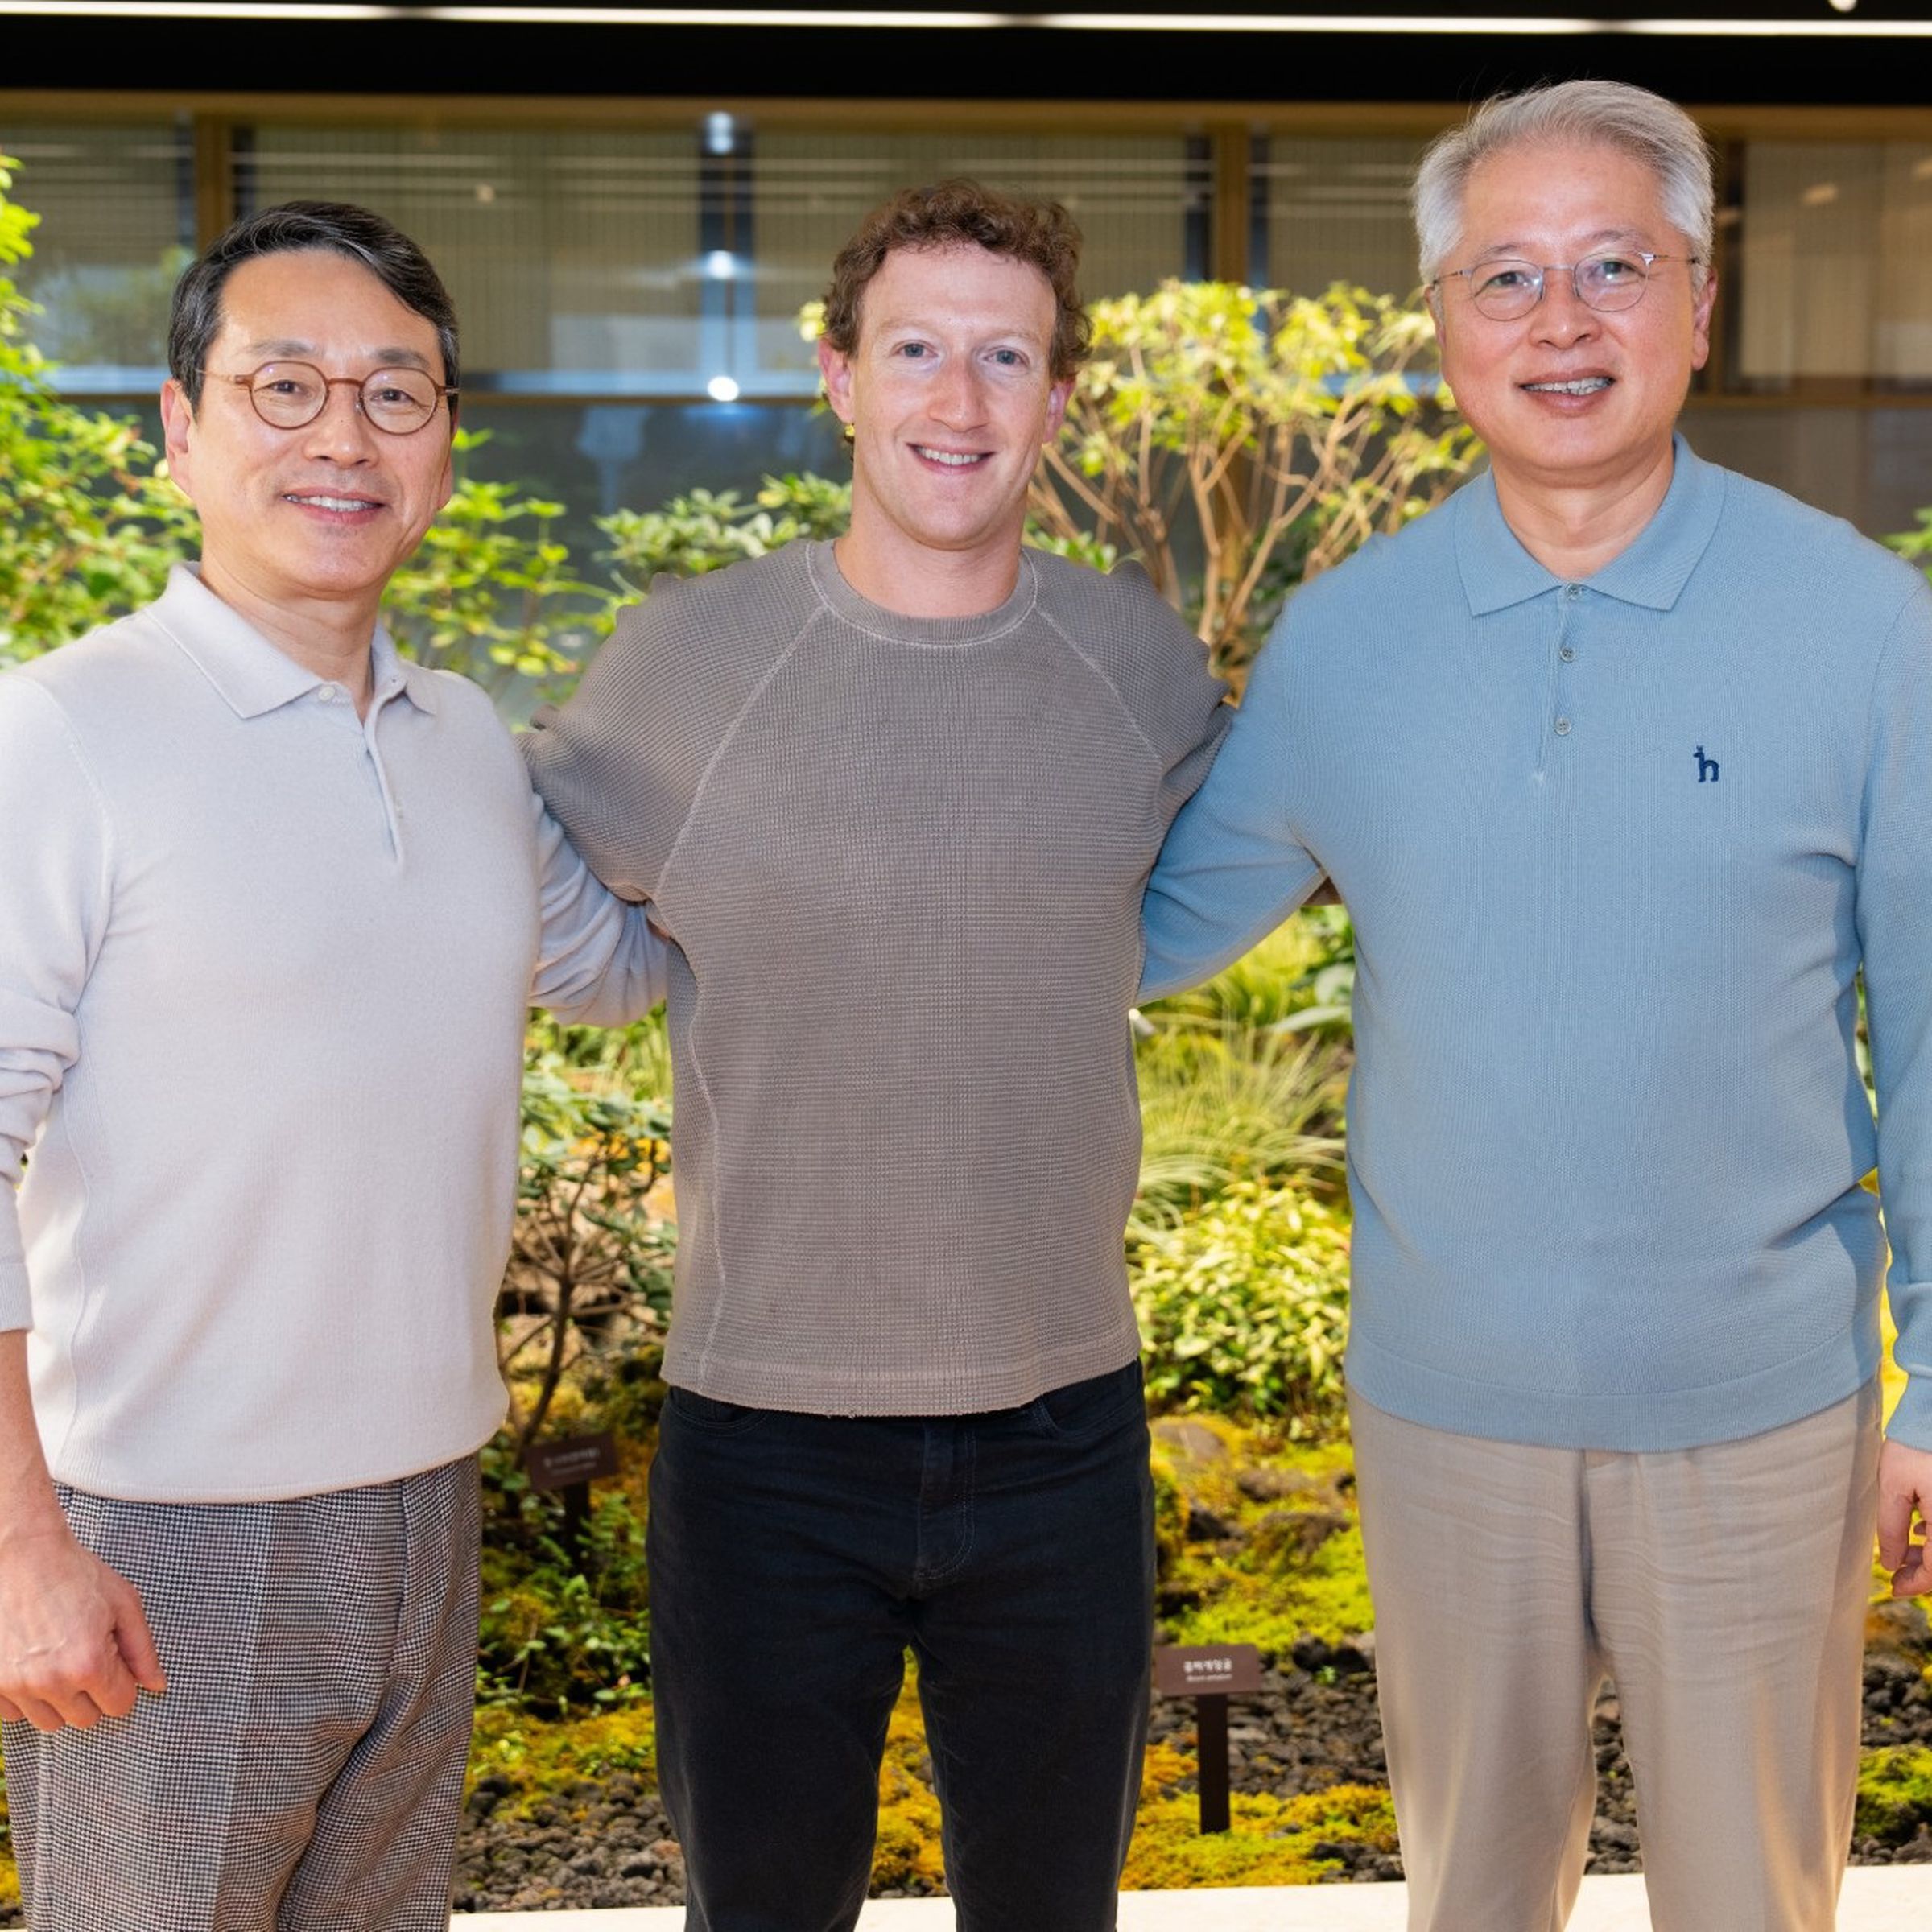 LG’s CEO William Cho and Home Entertainment Company president Park Hyoung-sei and Meta CEO Mark Zuckerberg taking a group picture in a garden.